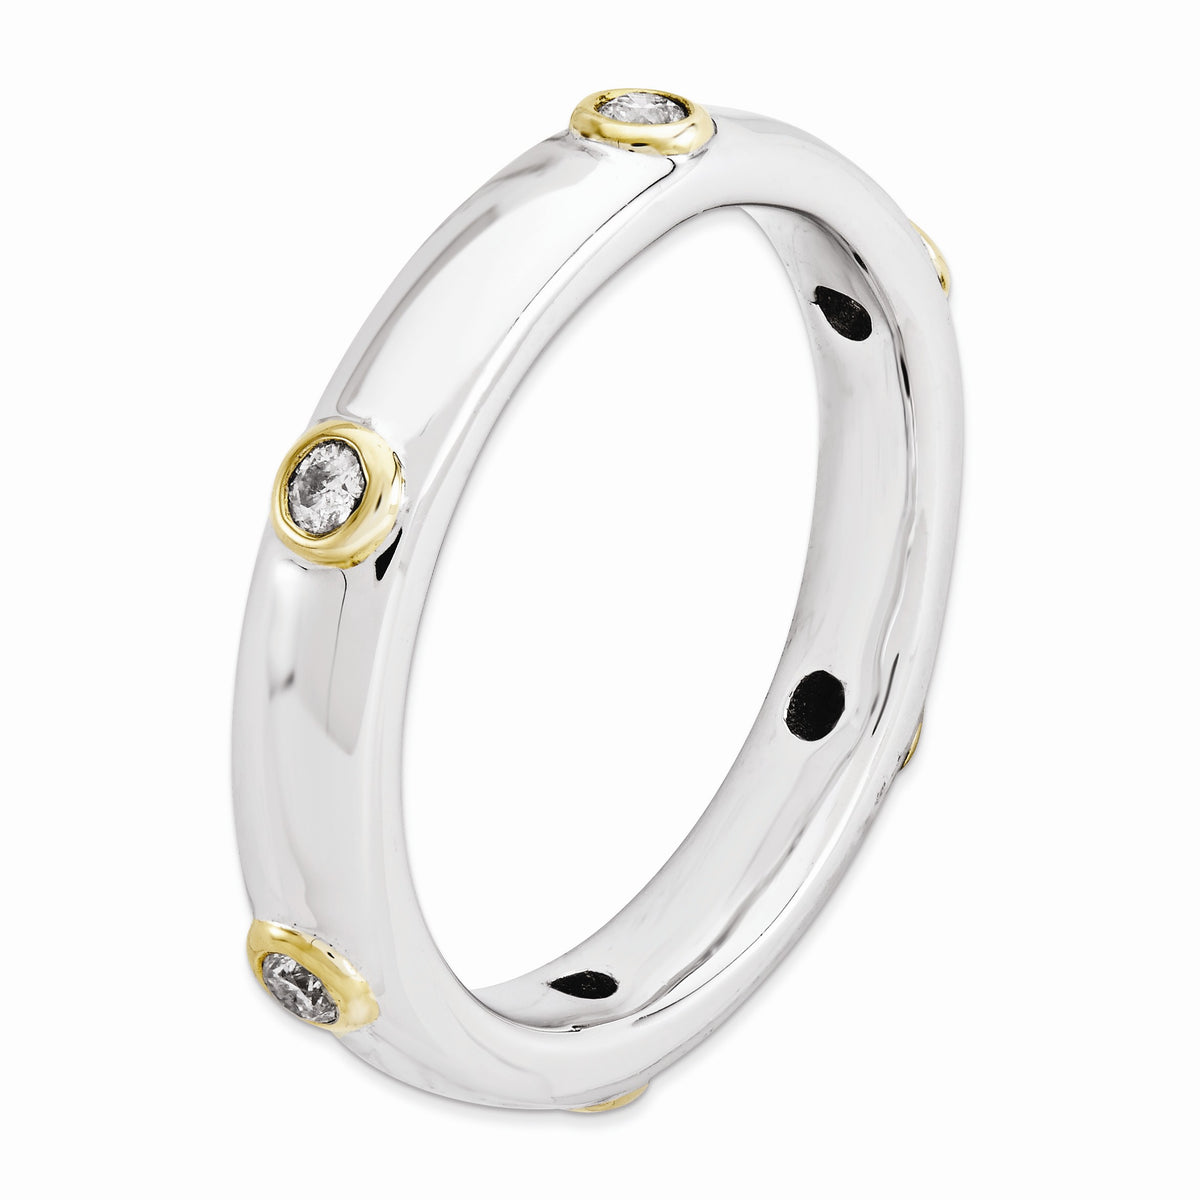 Alternate view of the Silver and 14K Gold Plated Stackable .122 Ctw HI/I3 Diamond Band by The Black Bow Jewelry Co.